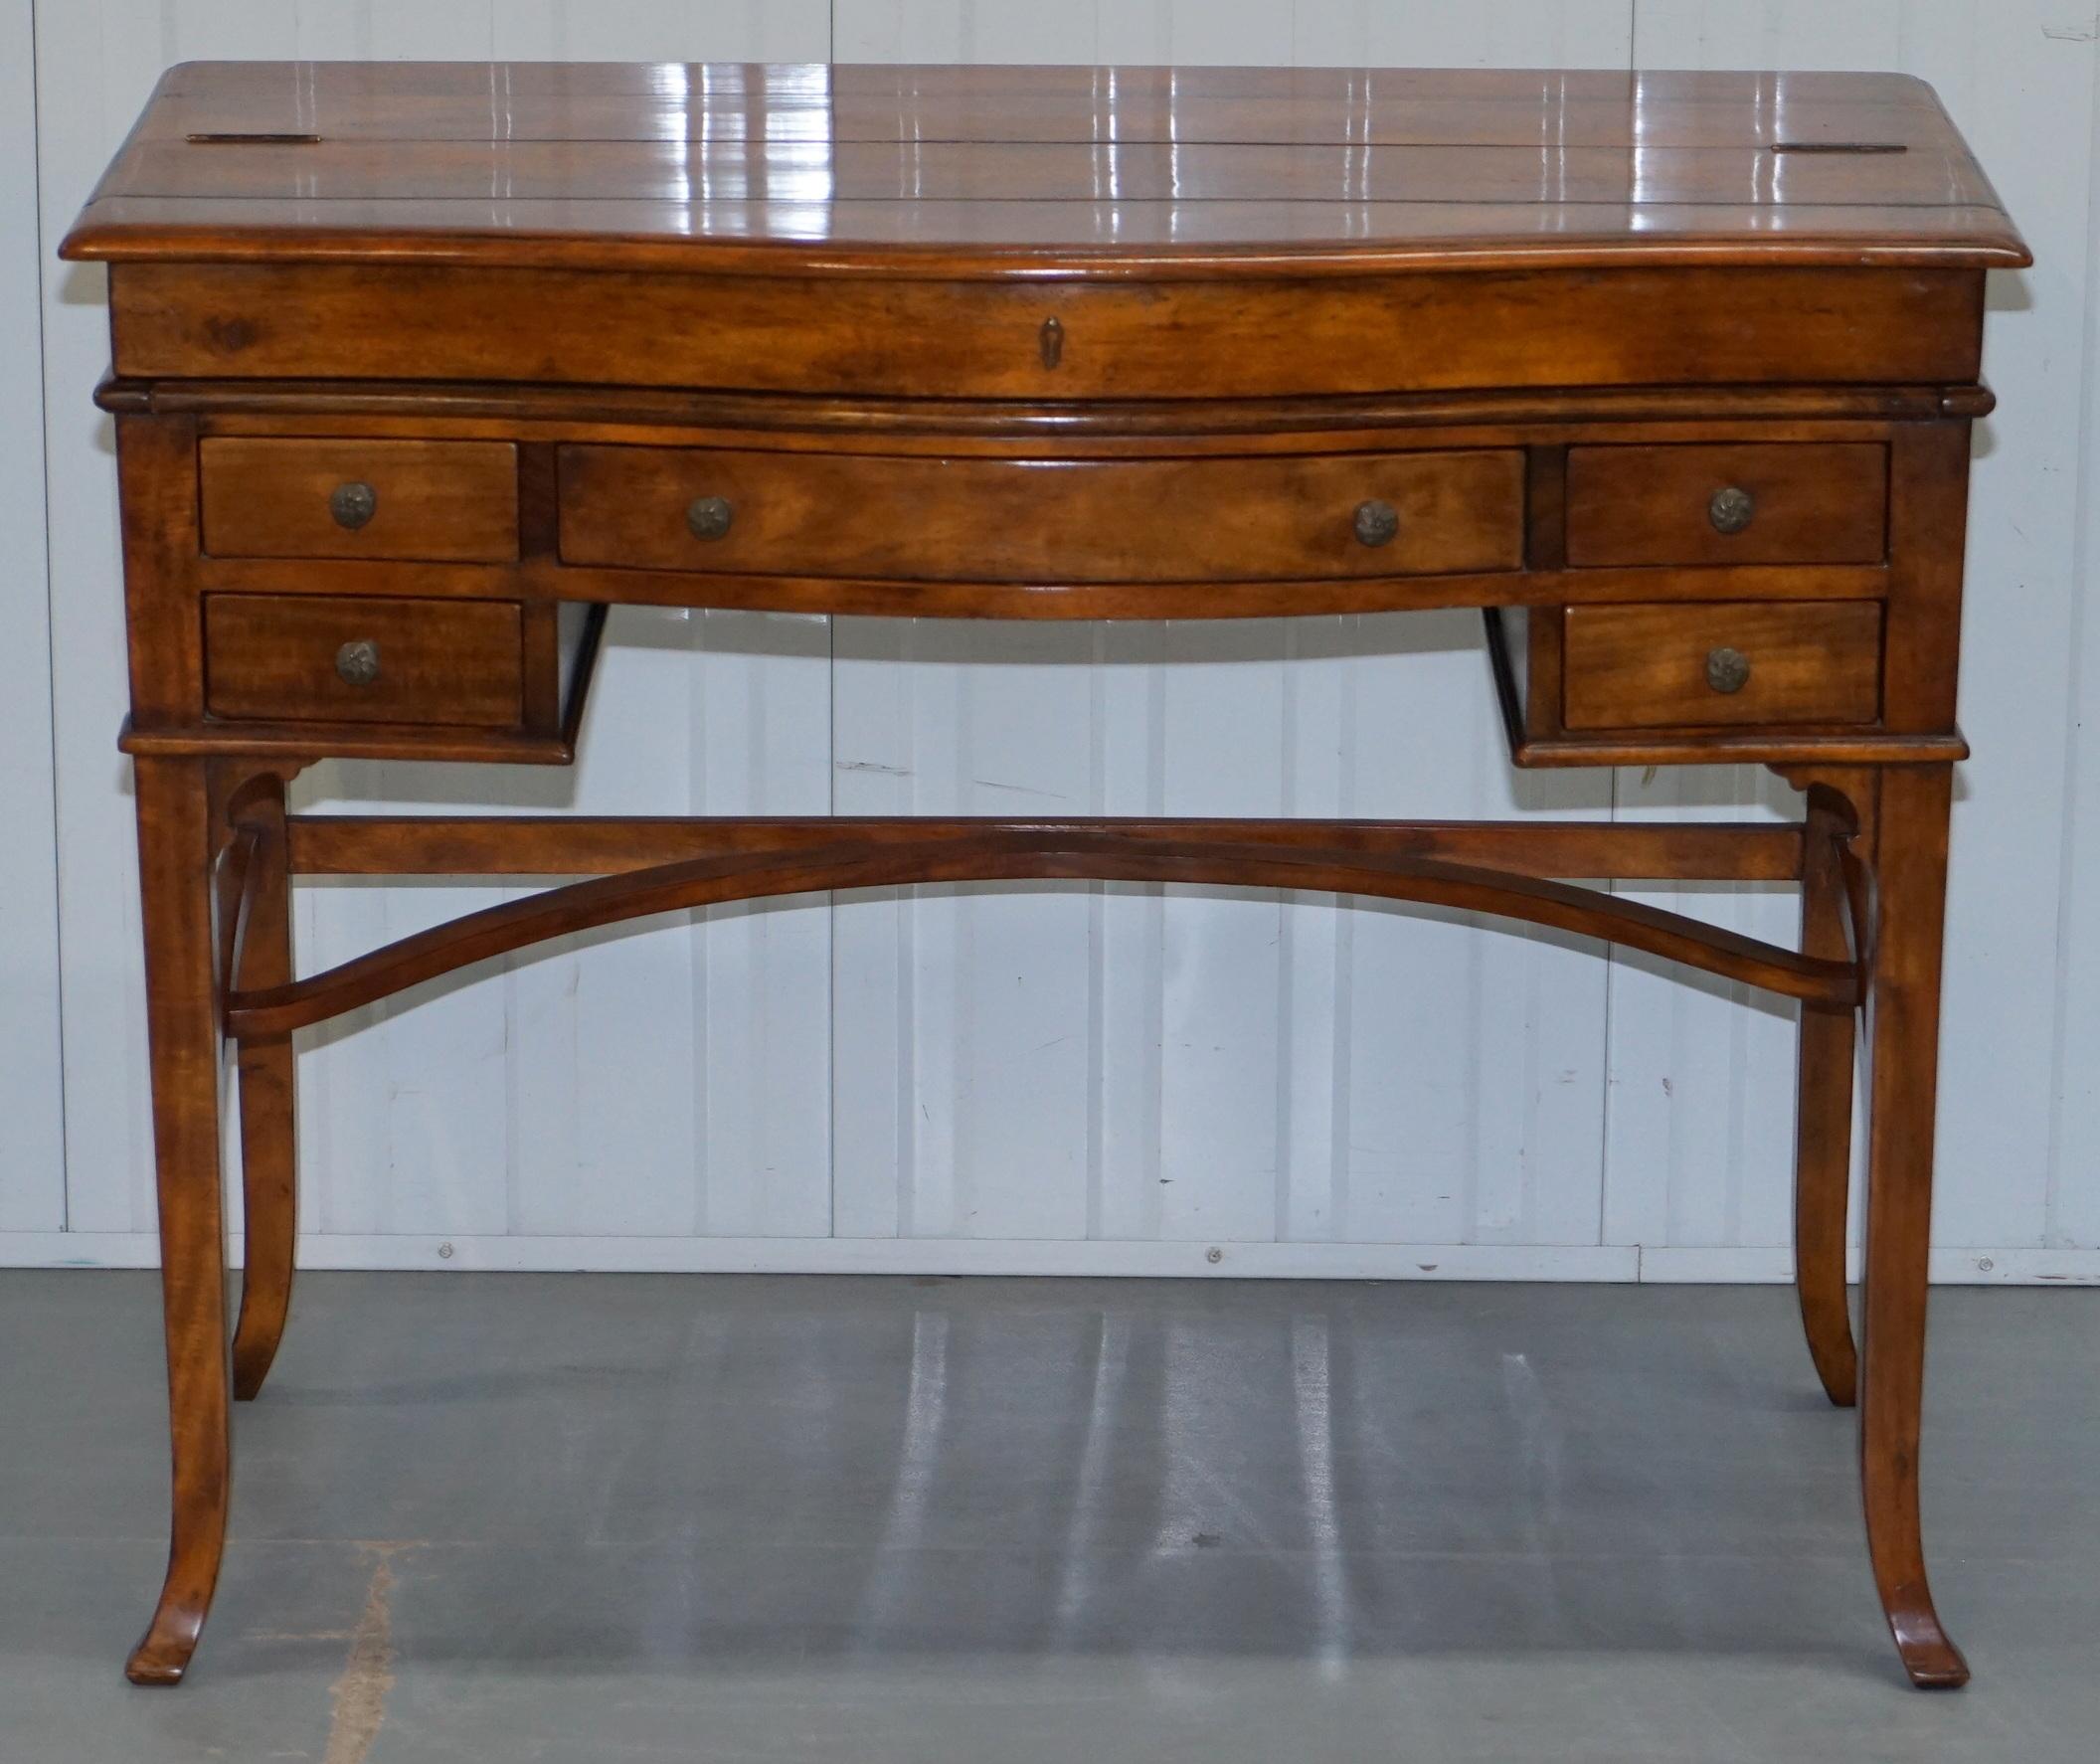 We are delighted to offer for sale this absolutely stunning Theodore Alexander the Residency fold-out writing table desk with hand dyed brown leather writing surface

A truly exquisite piece, as it stands it’s a very usable writing table that’s